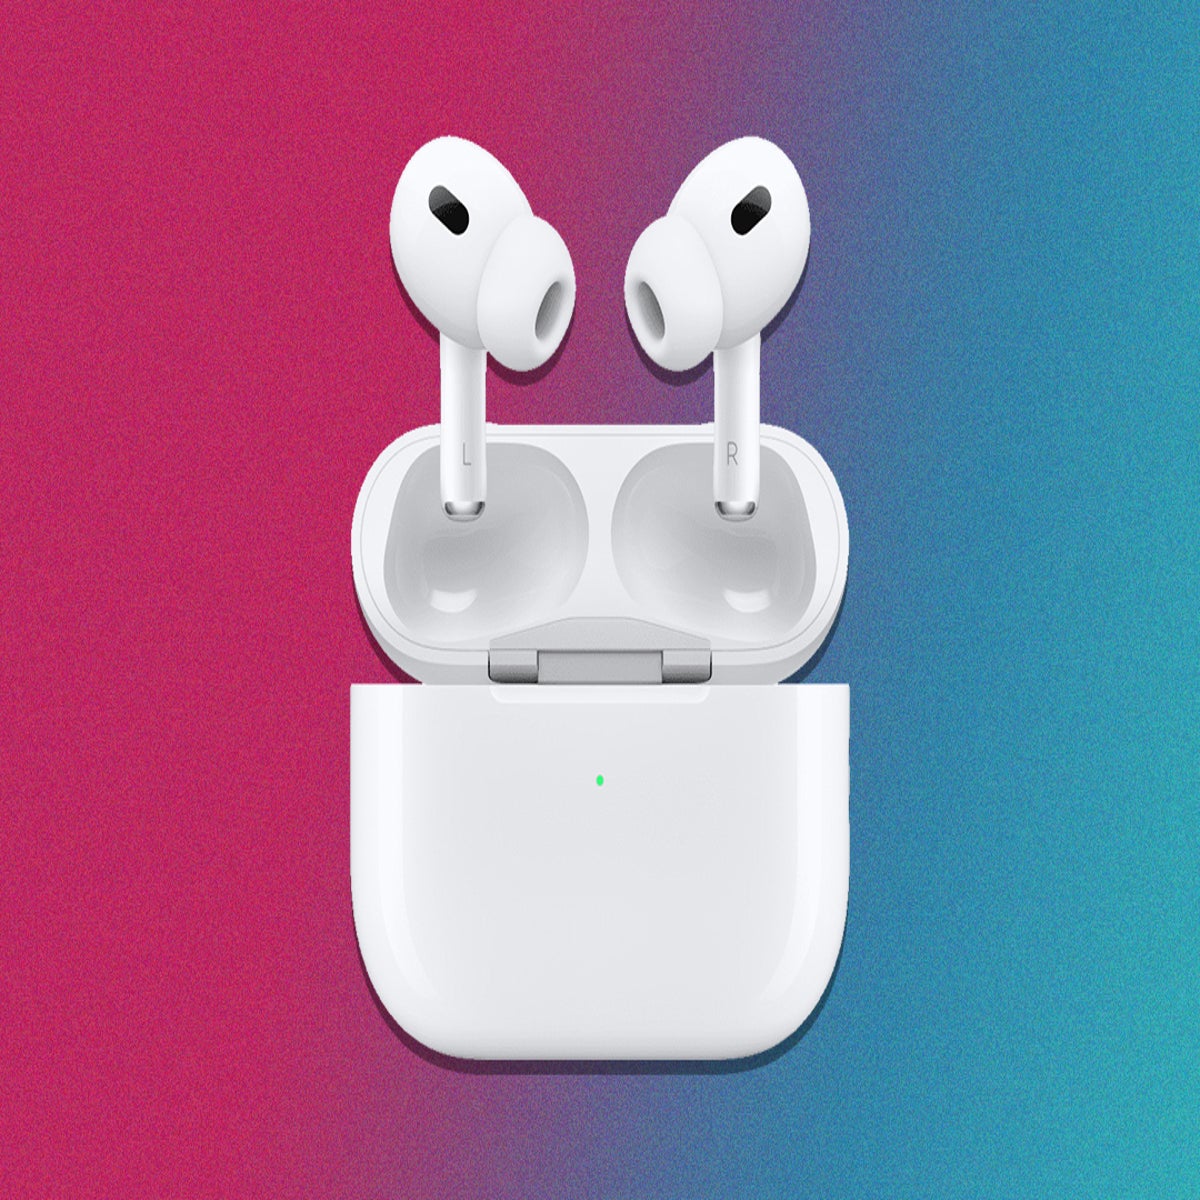 Apple's AirPods changed everything. They gave the company near